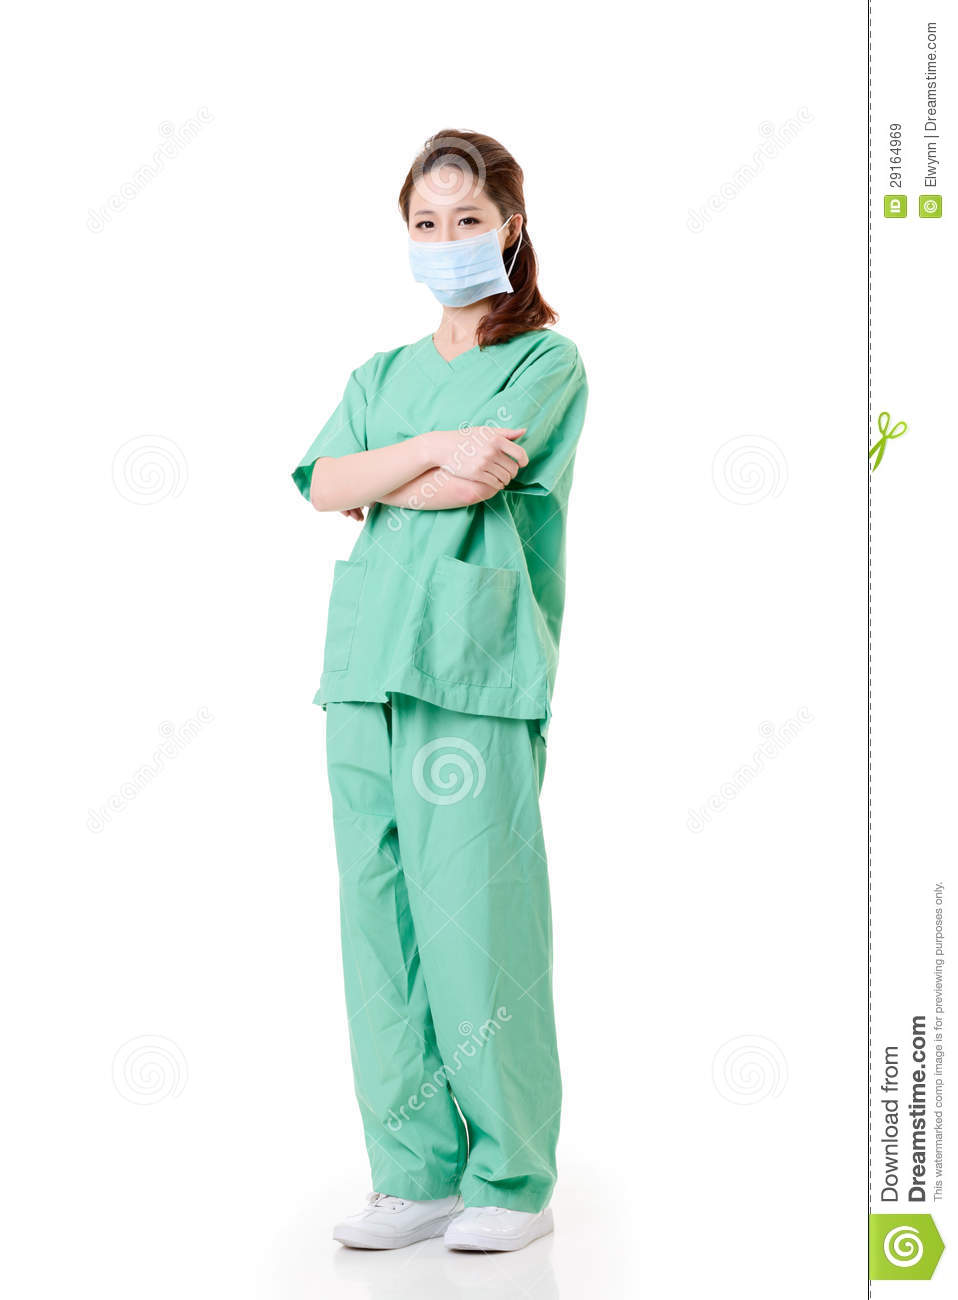 Young Health Care Worker Royalty Free Stock Images   Image  29164969